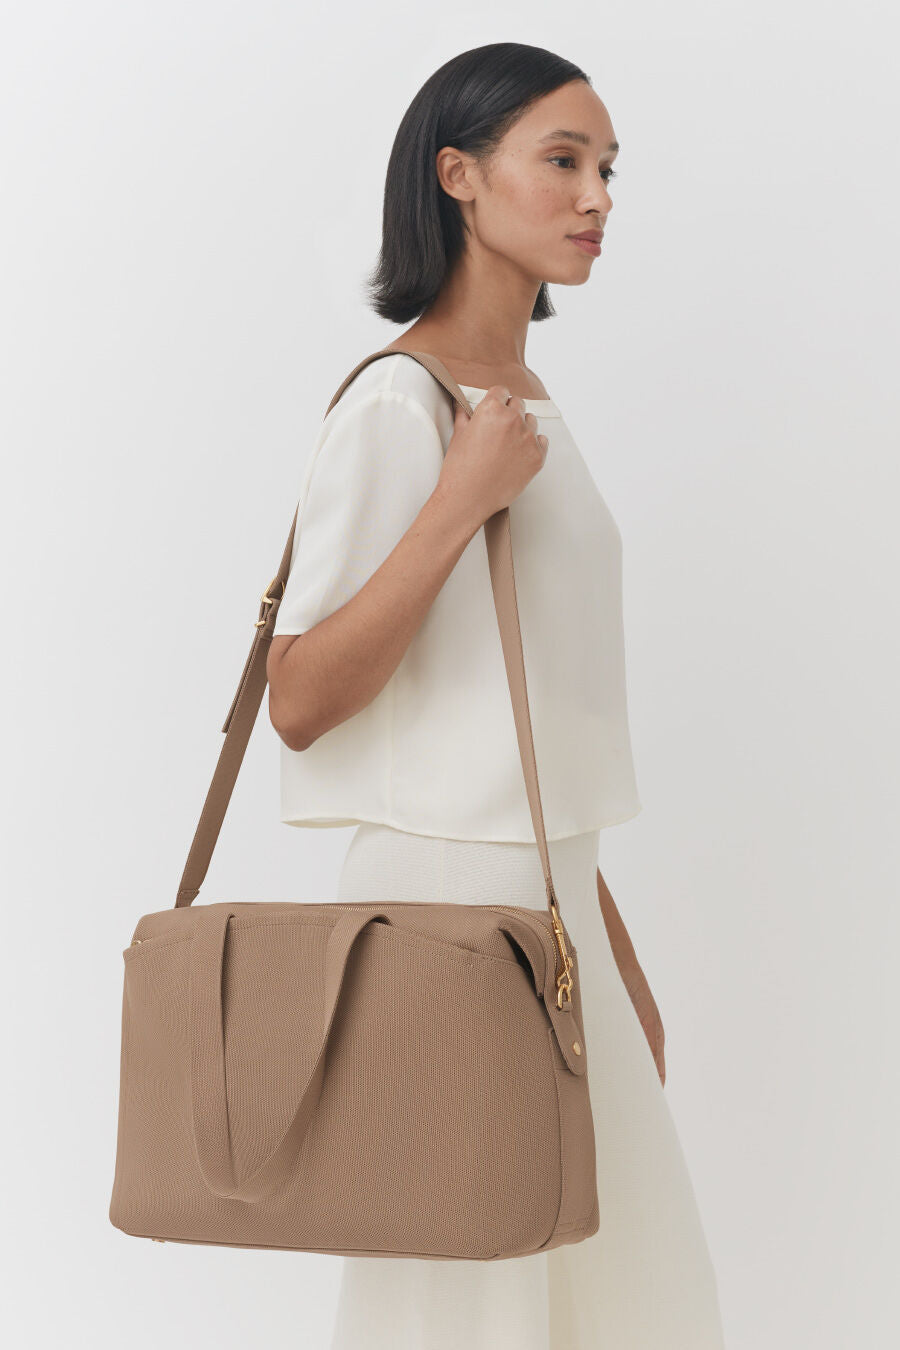 Woman walking with a shoulder bag.